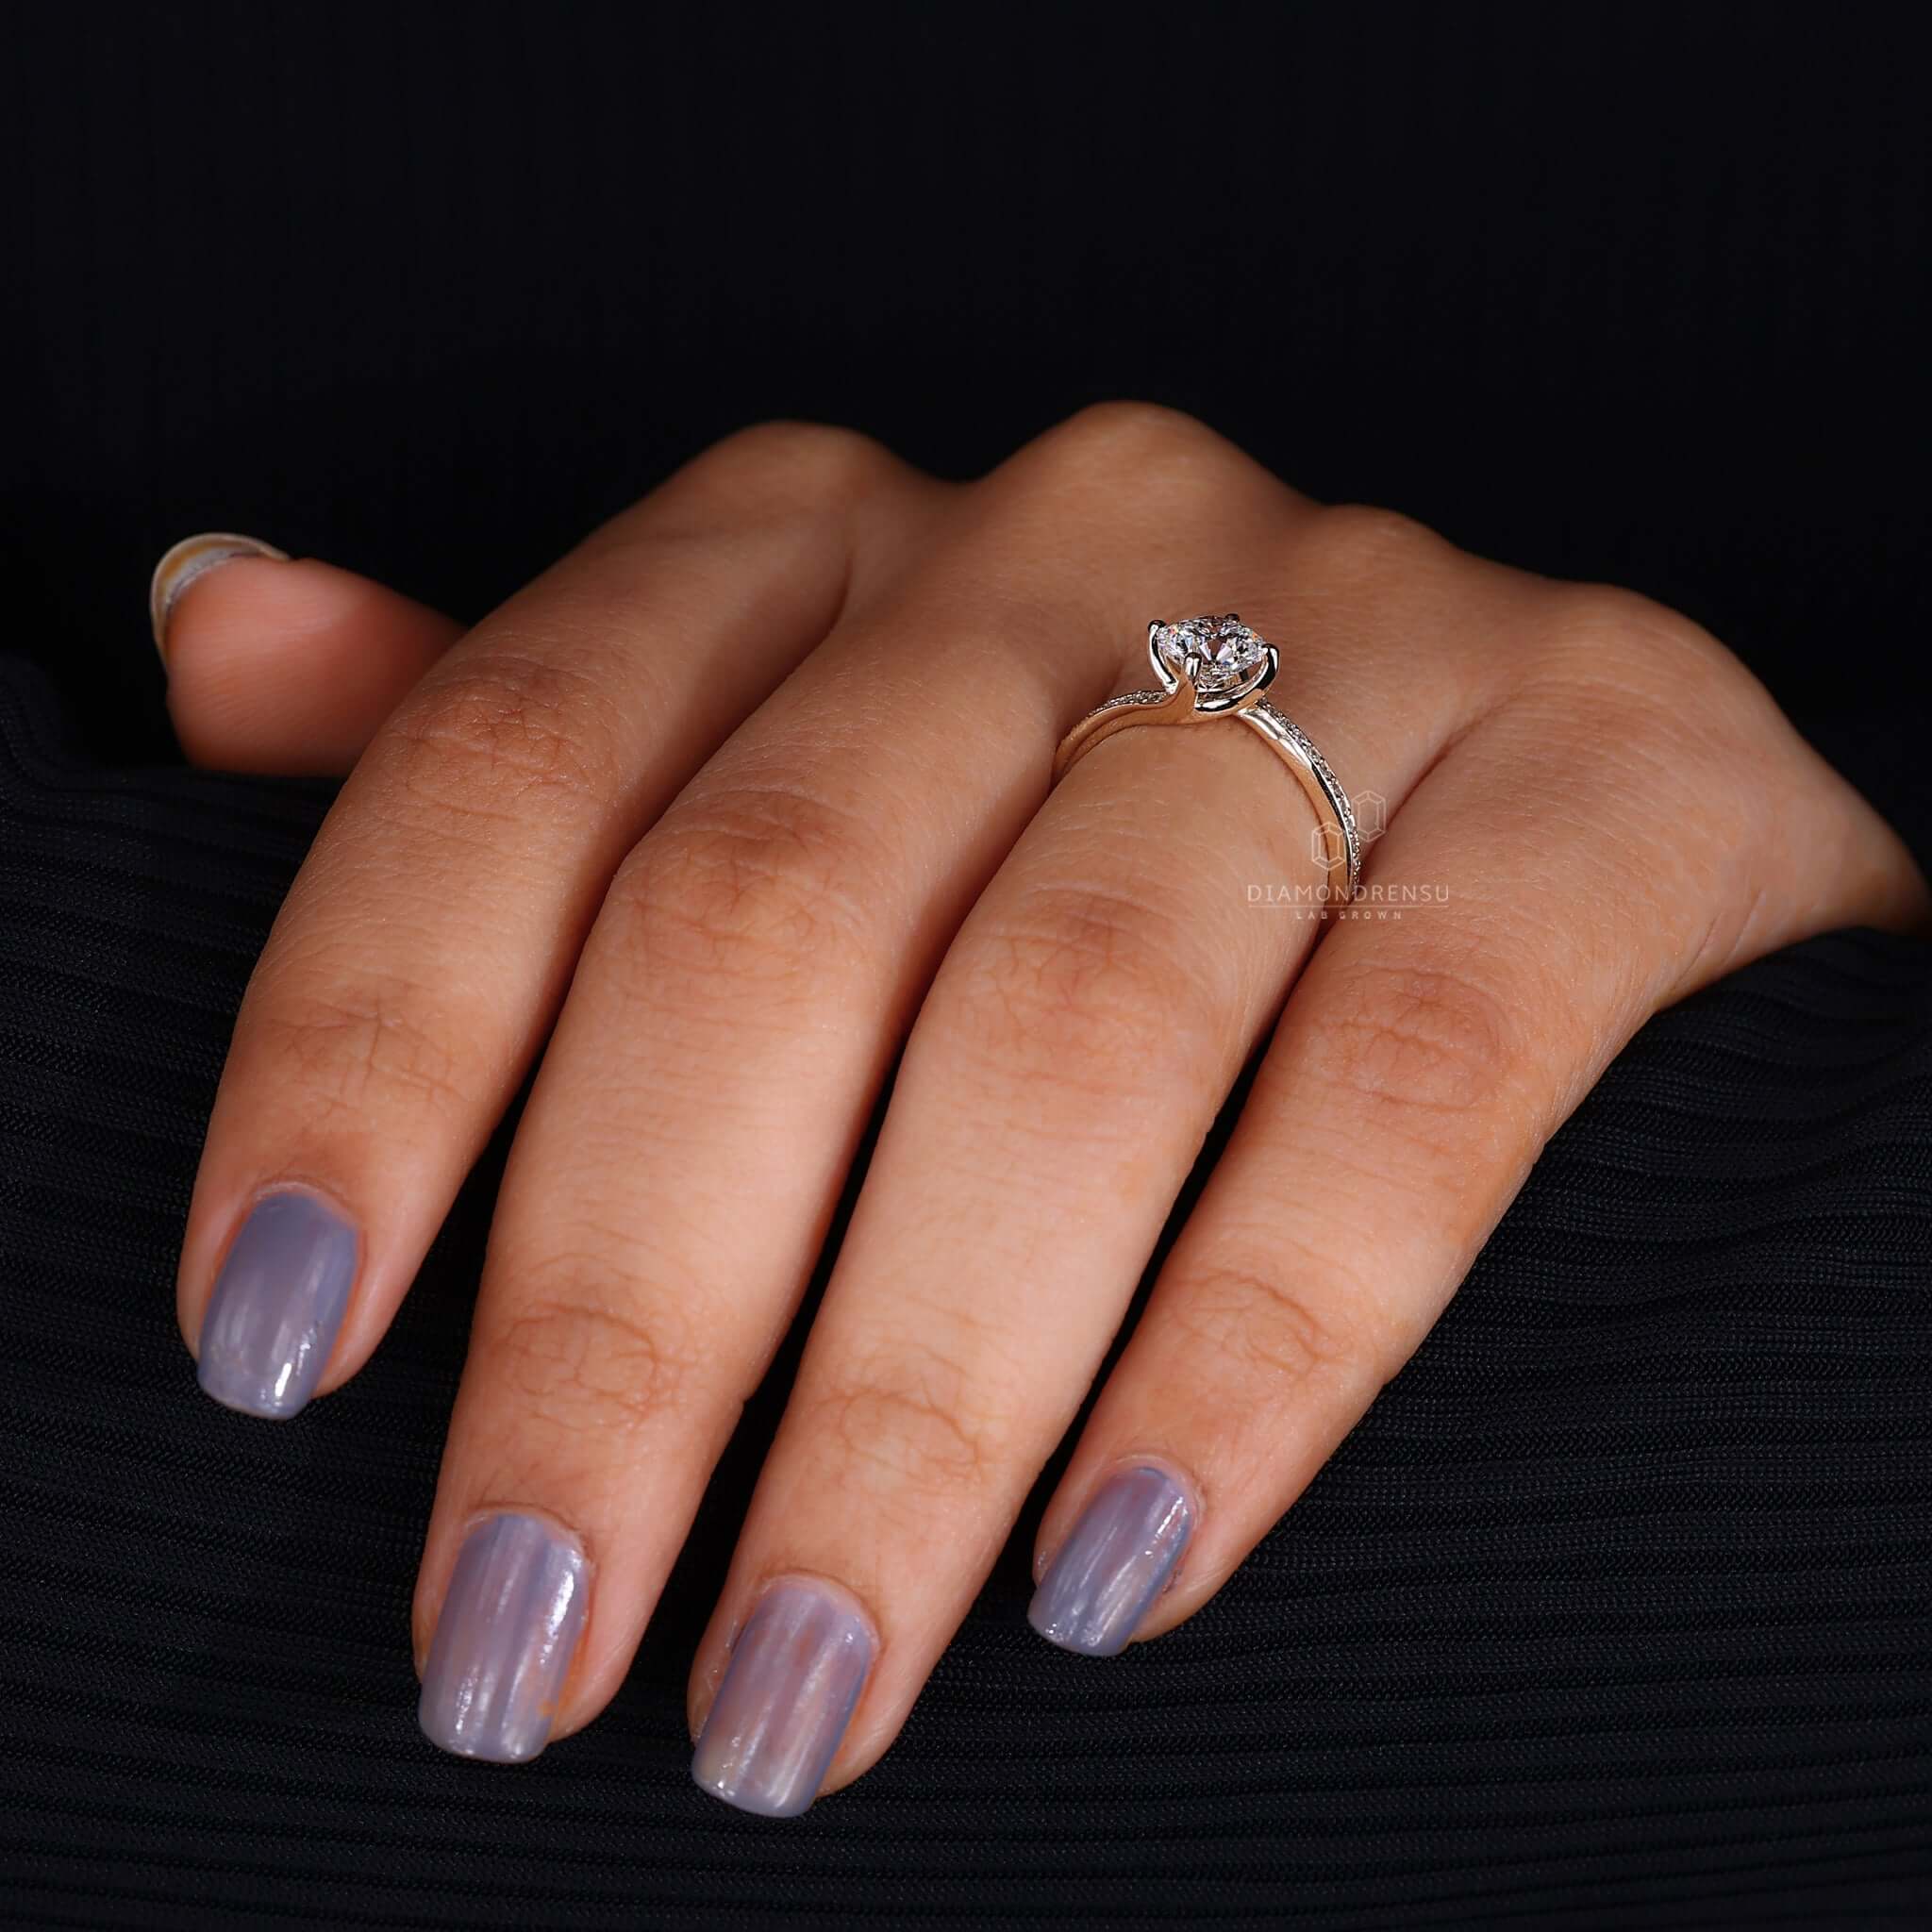 Exquisite bypass ring setting on hand, displaying its unique crossover design.